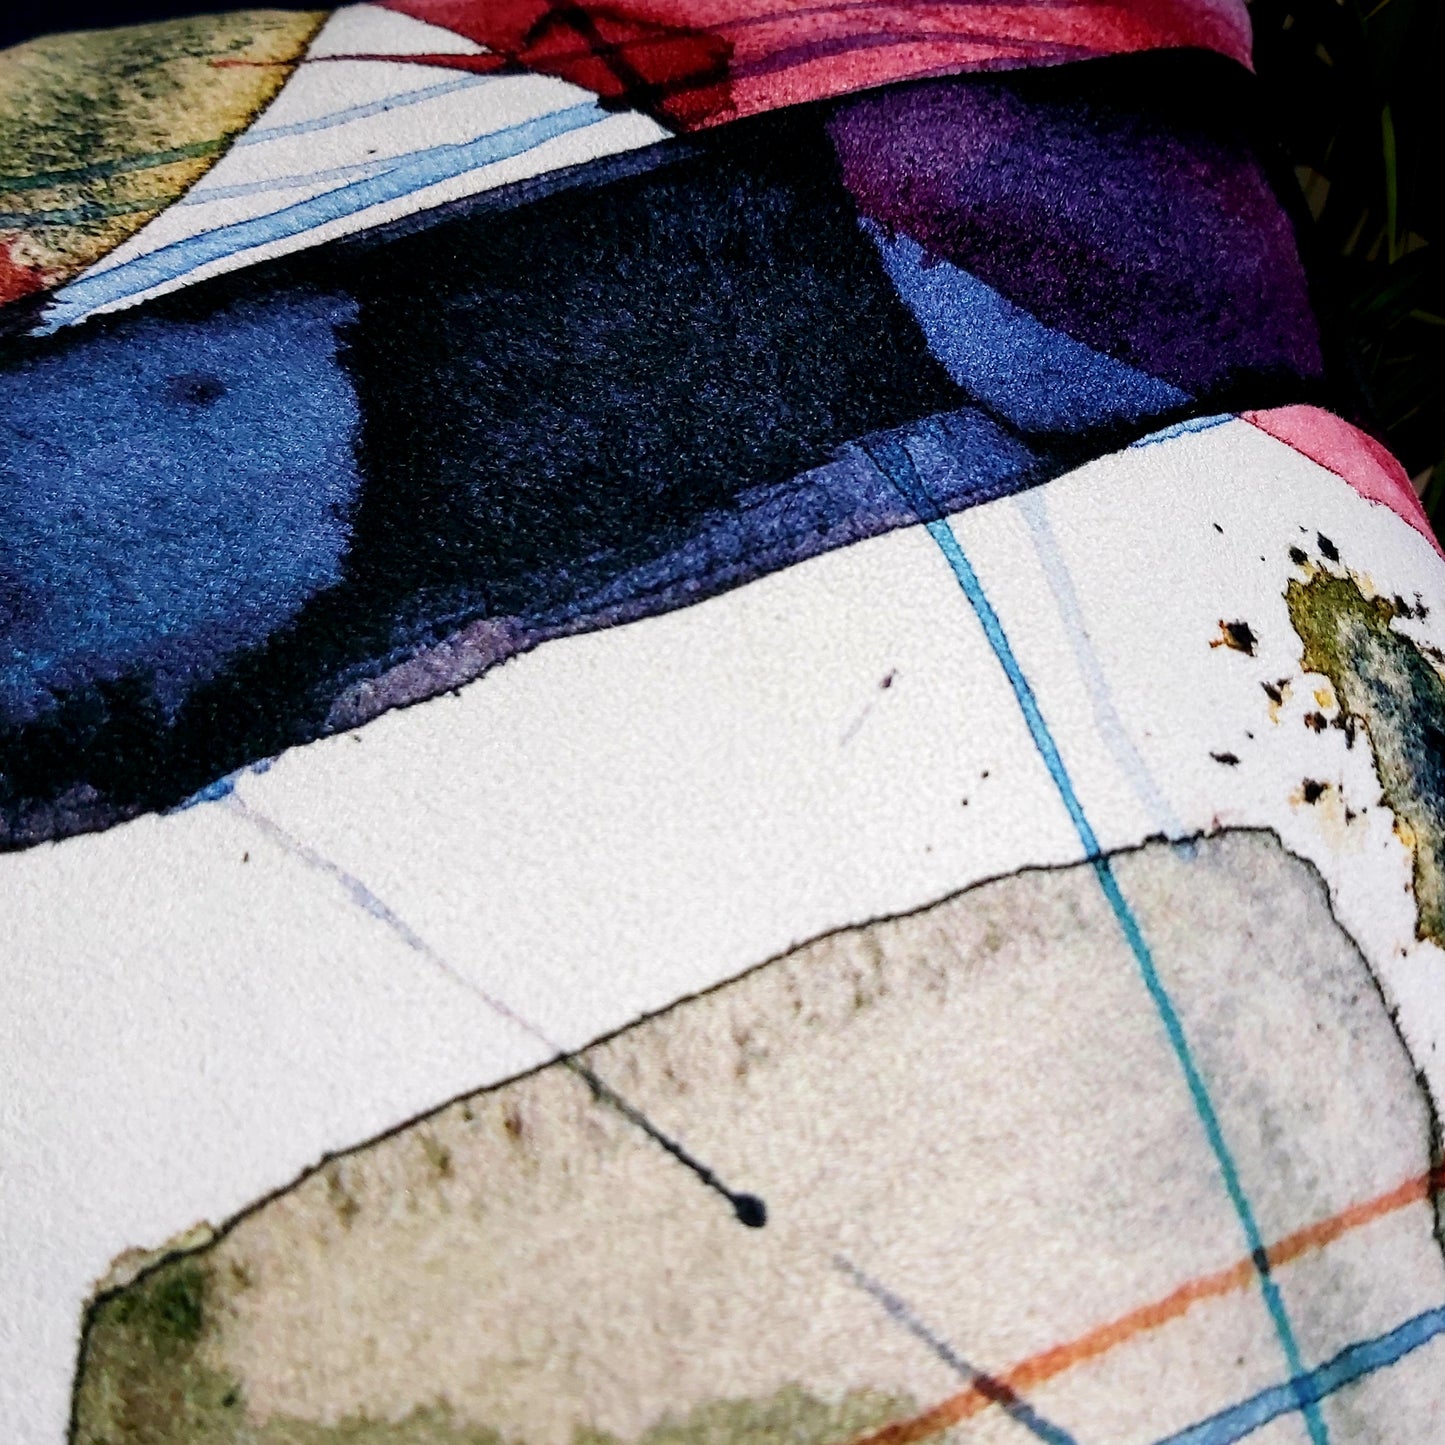 Abstract Watercolour Square Cushion